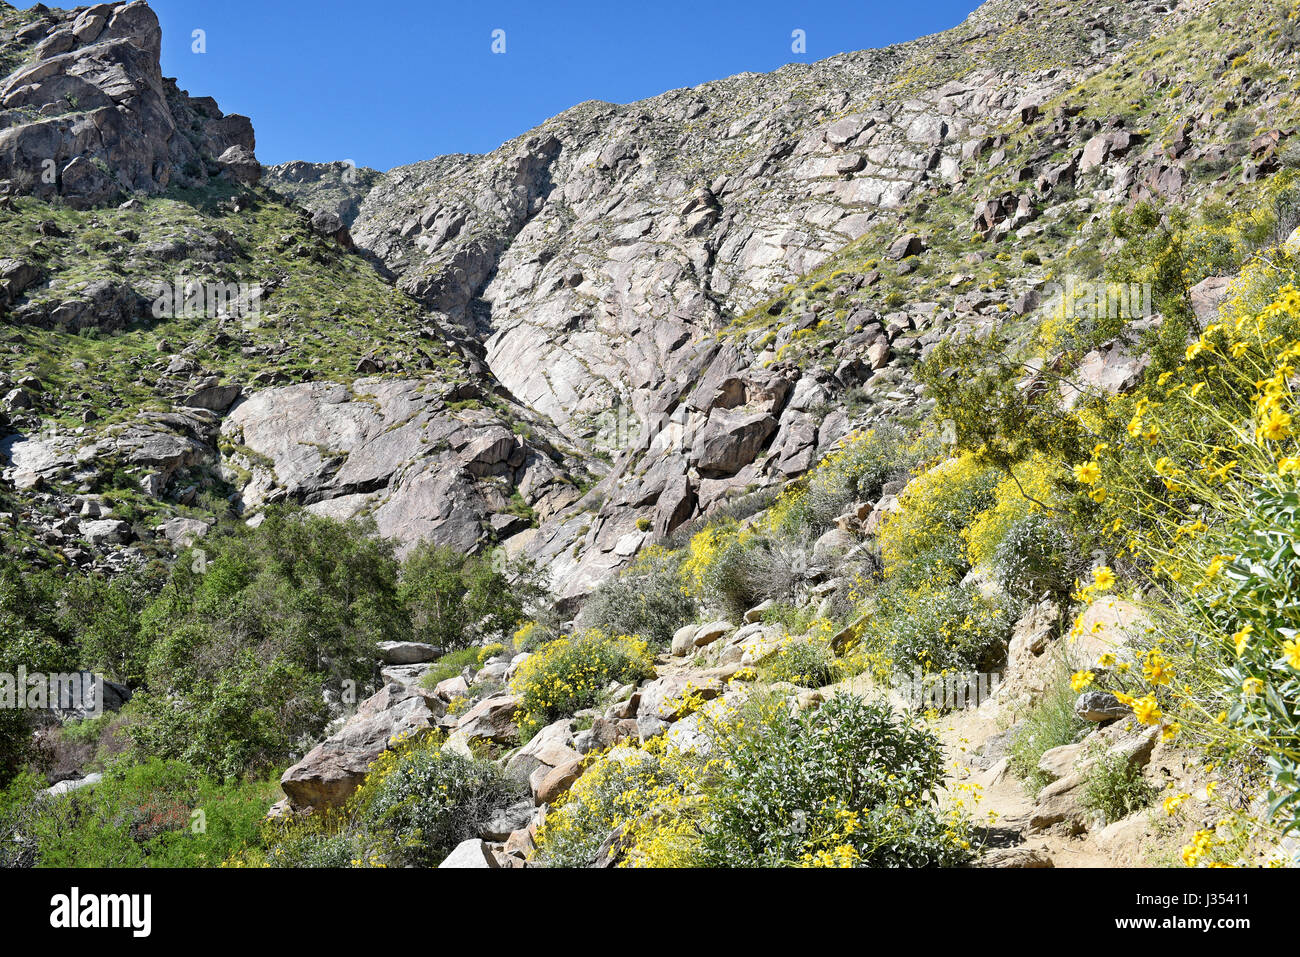 PALM SPRINGS, CA - MARCH 24, 2017: Tahquitz Canyon trail. The canyon is one of the most beautiful and culturally sensitive areas of the Agua Caliente  Stock Photo